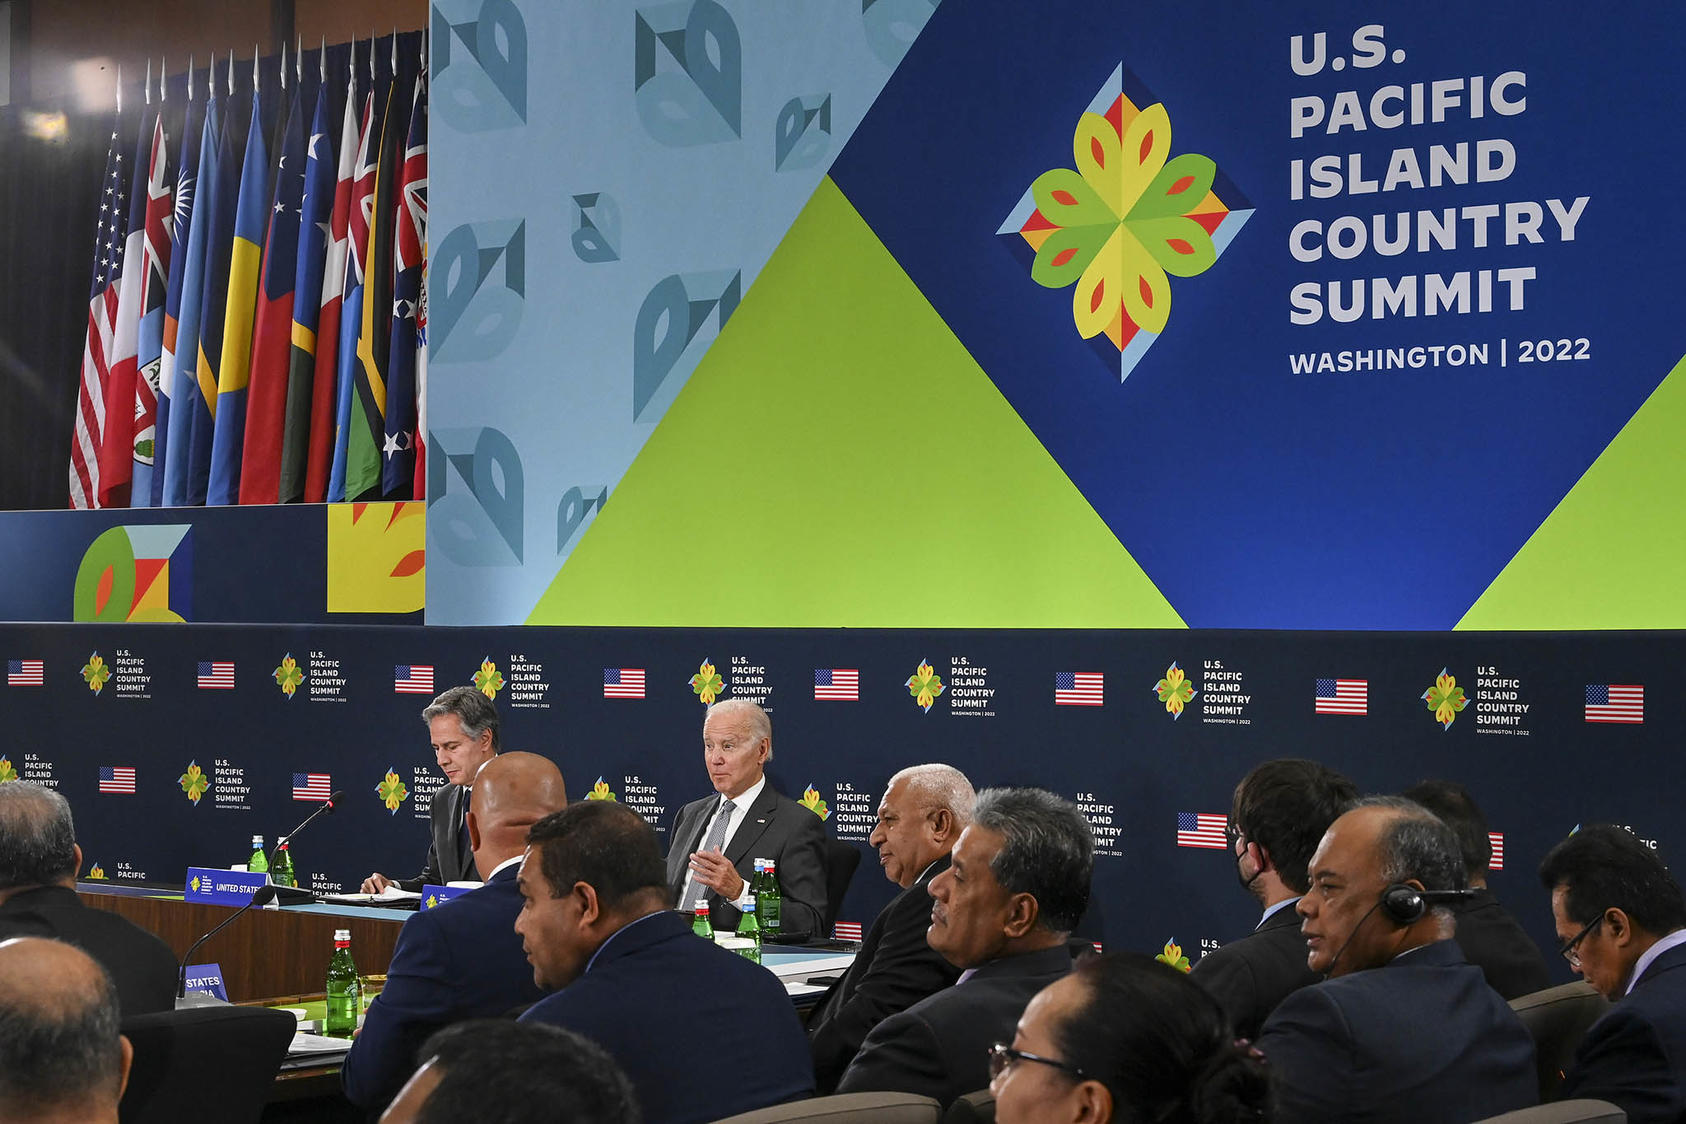 Secretary Blinken and President Biden host the U.S.-Pacific Island Country Summit in an effort to demonstrate the United States’ enduring partnership with Pacific Island countries, in Washington on Sept. 29, 2022. (Kenny Holston/The New York Times)